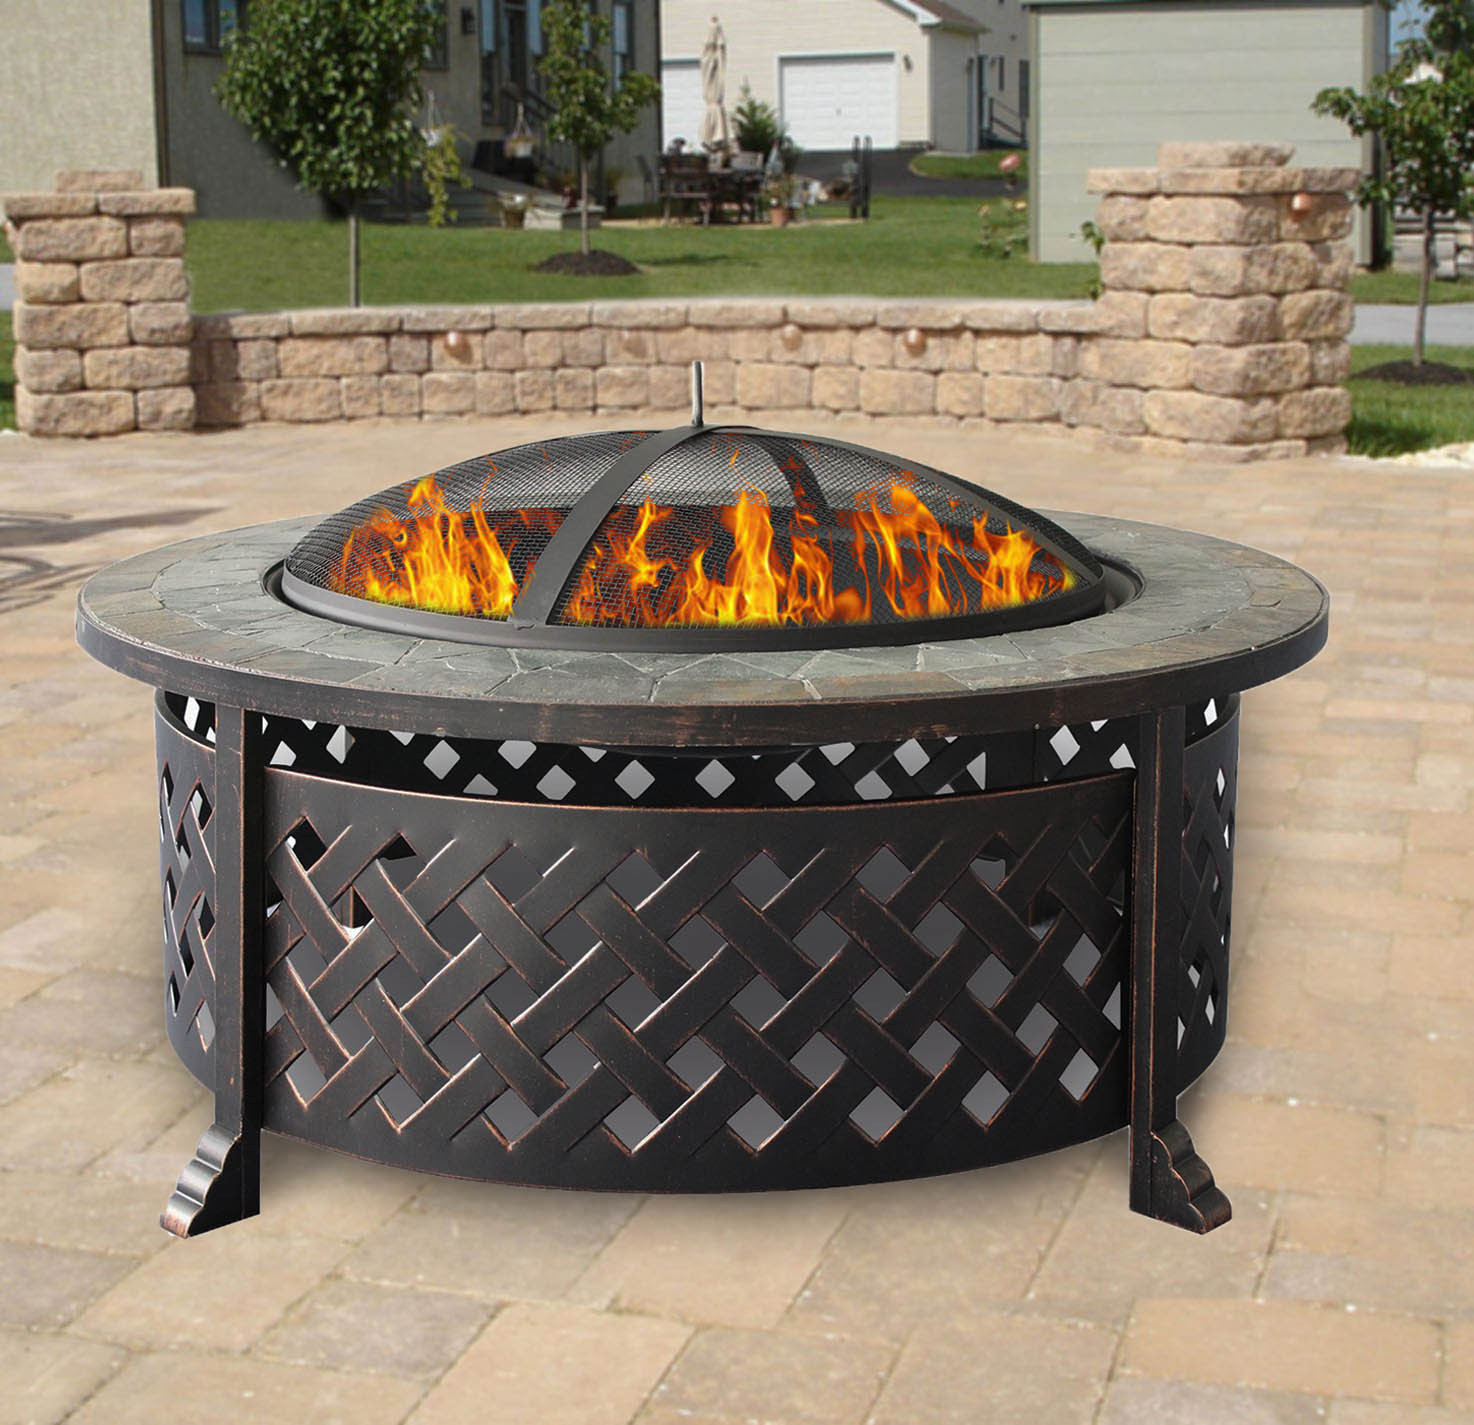 Patio Wood Fire Pit
 Outdoor 34" Firepit Fireplace Deck Fire Pit Heater Metal